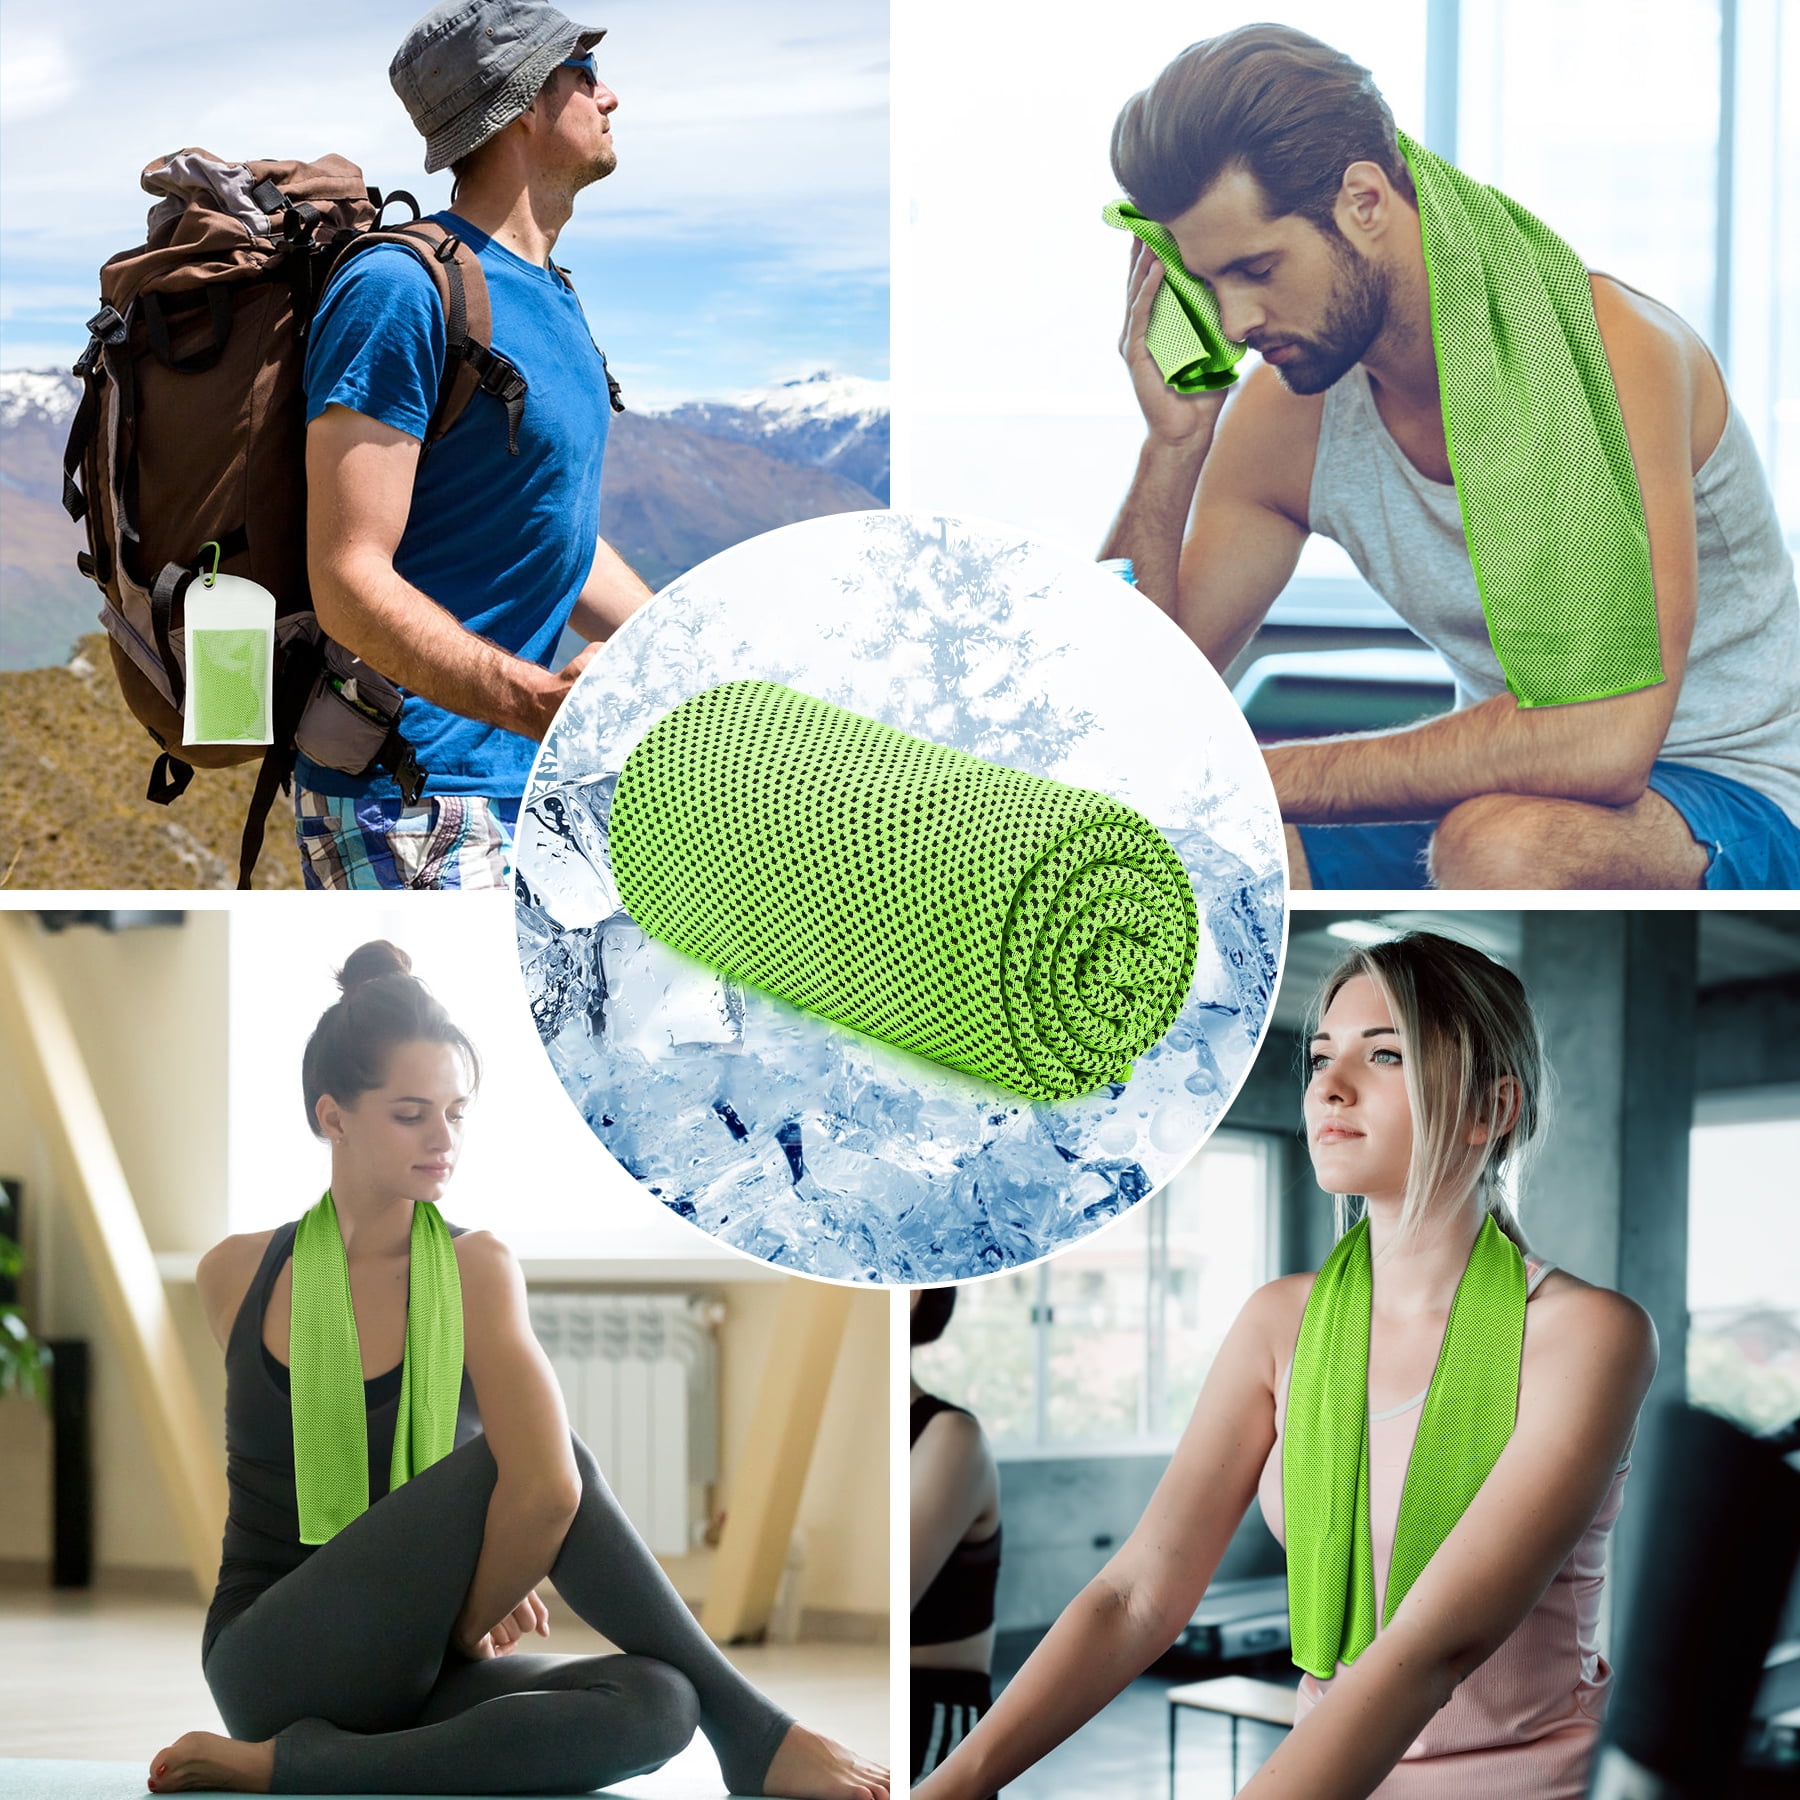 4 pc Cooling Towel Cooling Neck Wrap for Fitness Workout Gym Yoga Pilates  Towels